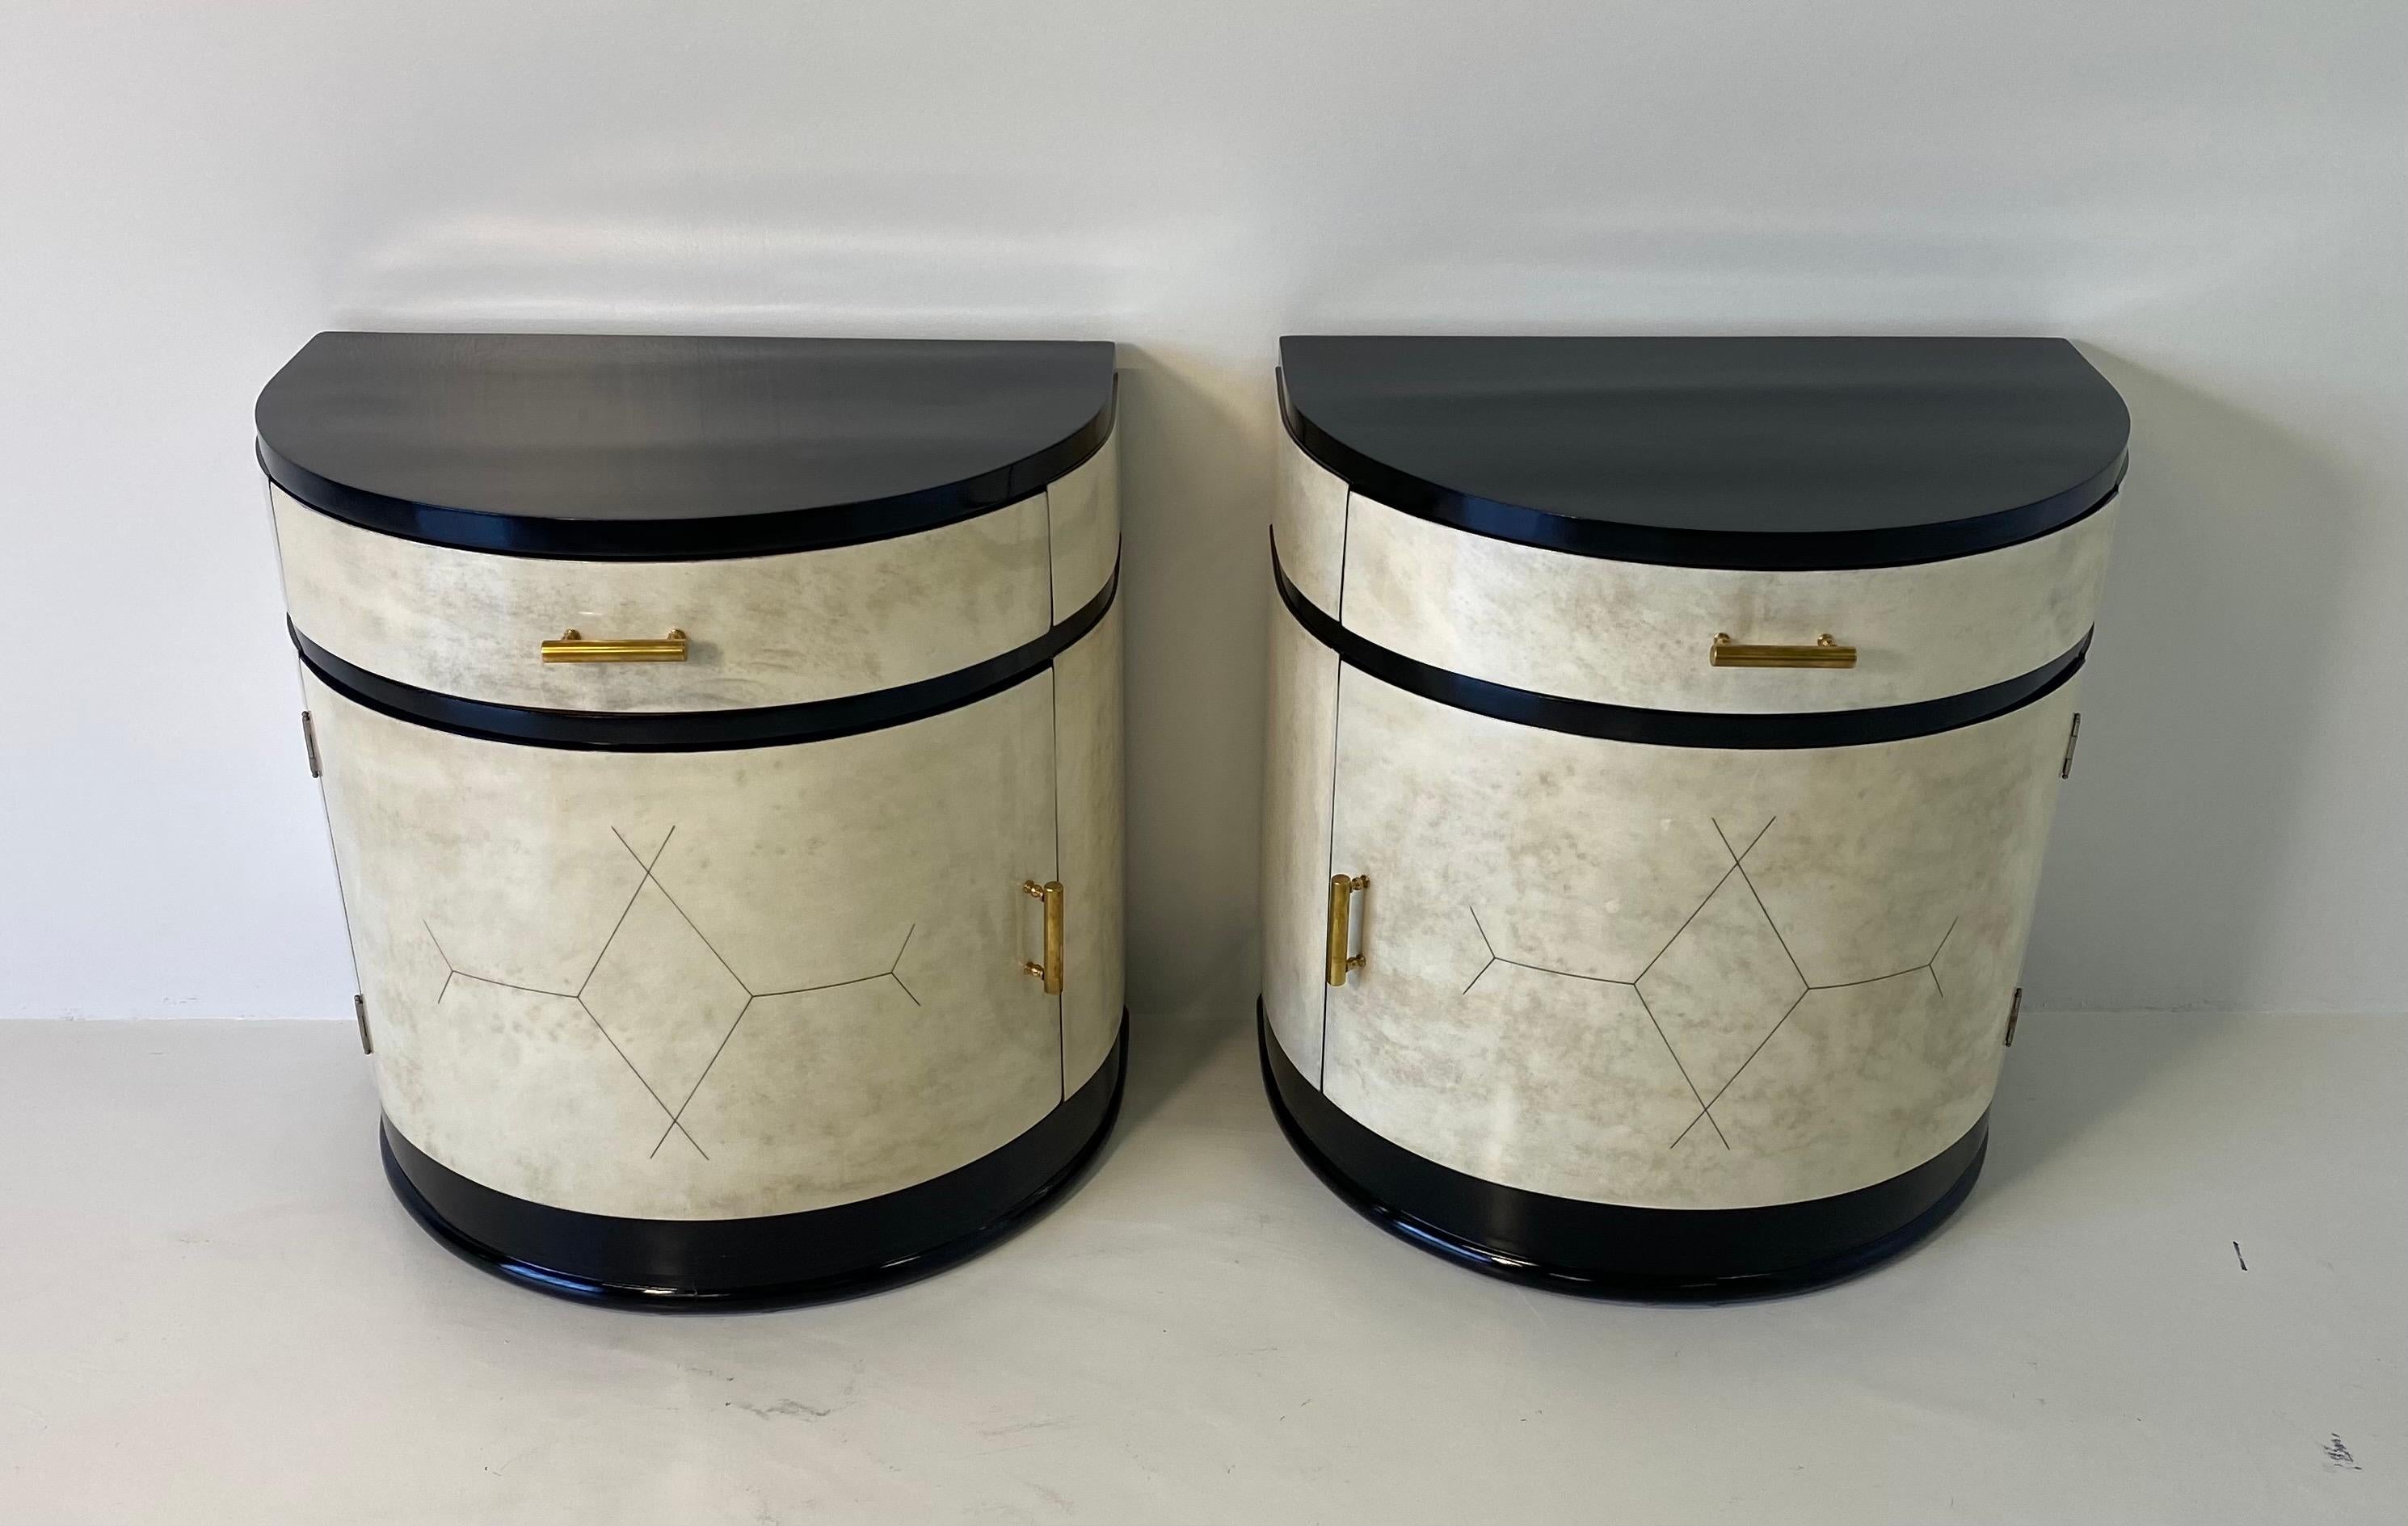 Rare Art Deco bedside tables from the 1930s made in Italy completely covered in parchment.
Profiles, base and top are black lacquered while the handles are in brass.
Fully restored.